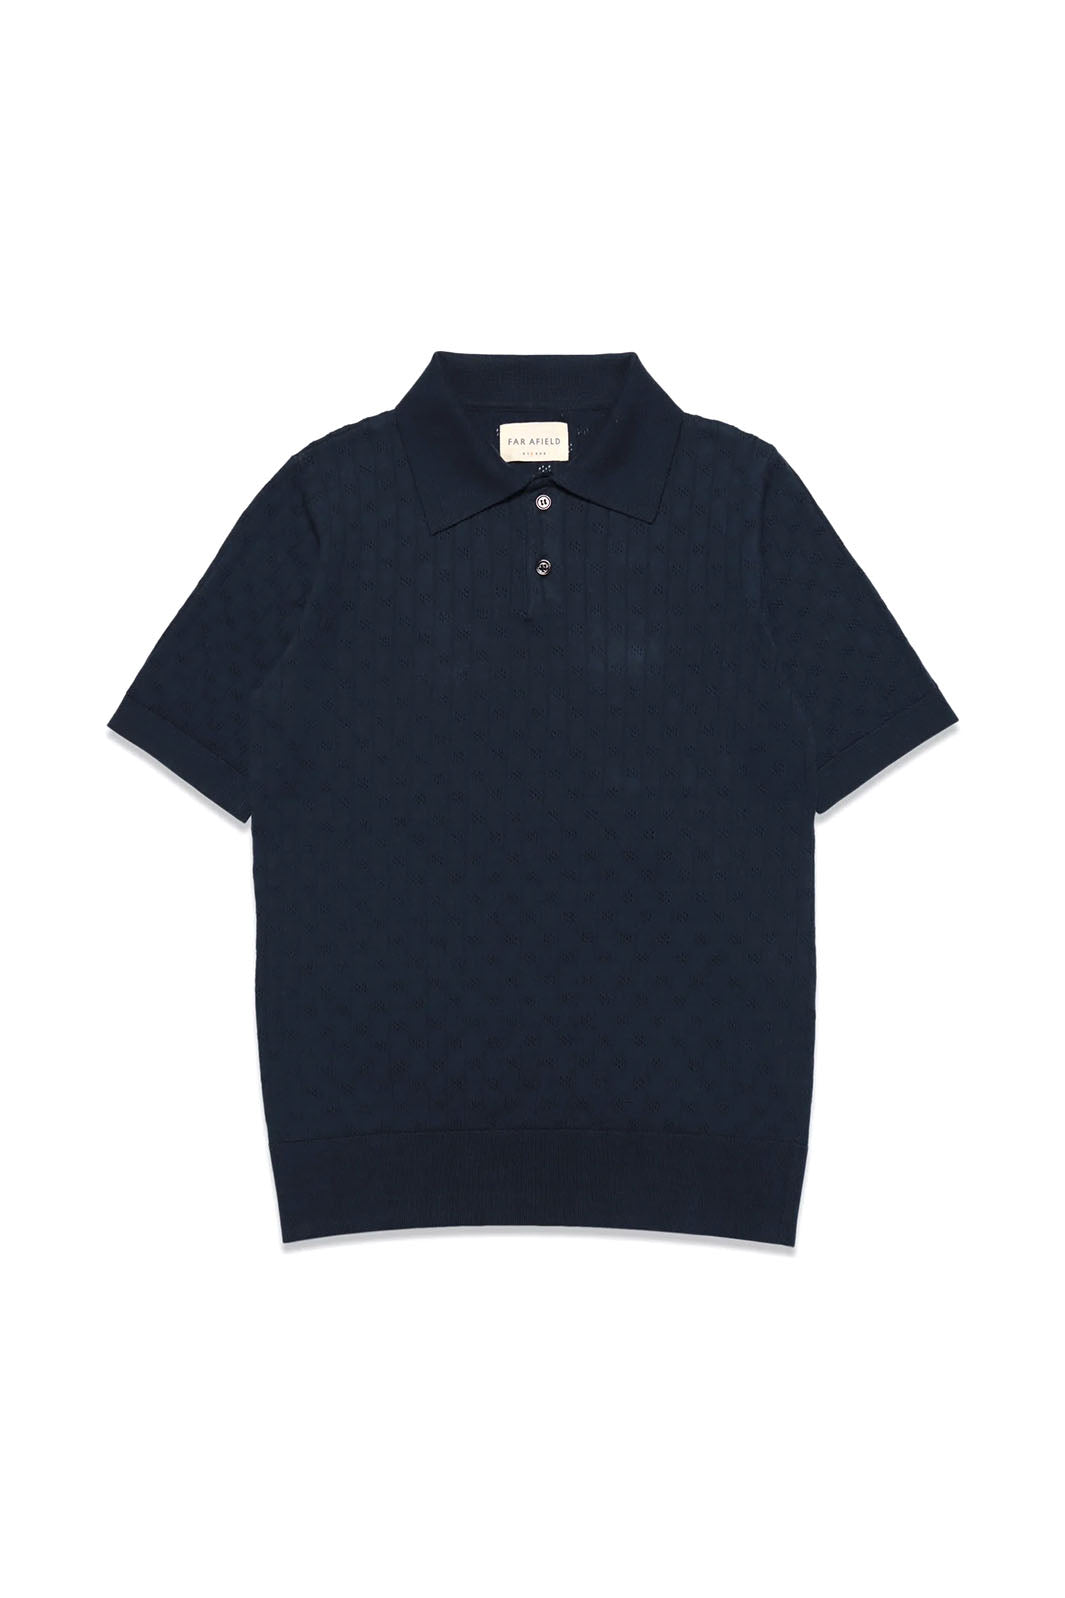 Jacobs Polo - Navy Iris Perforated Lace